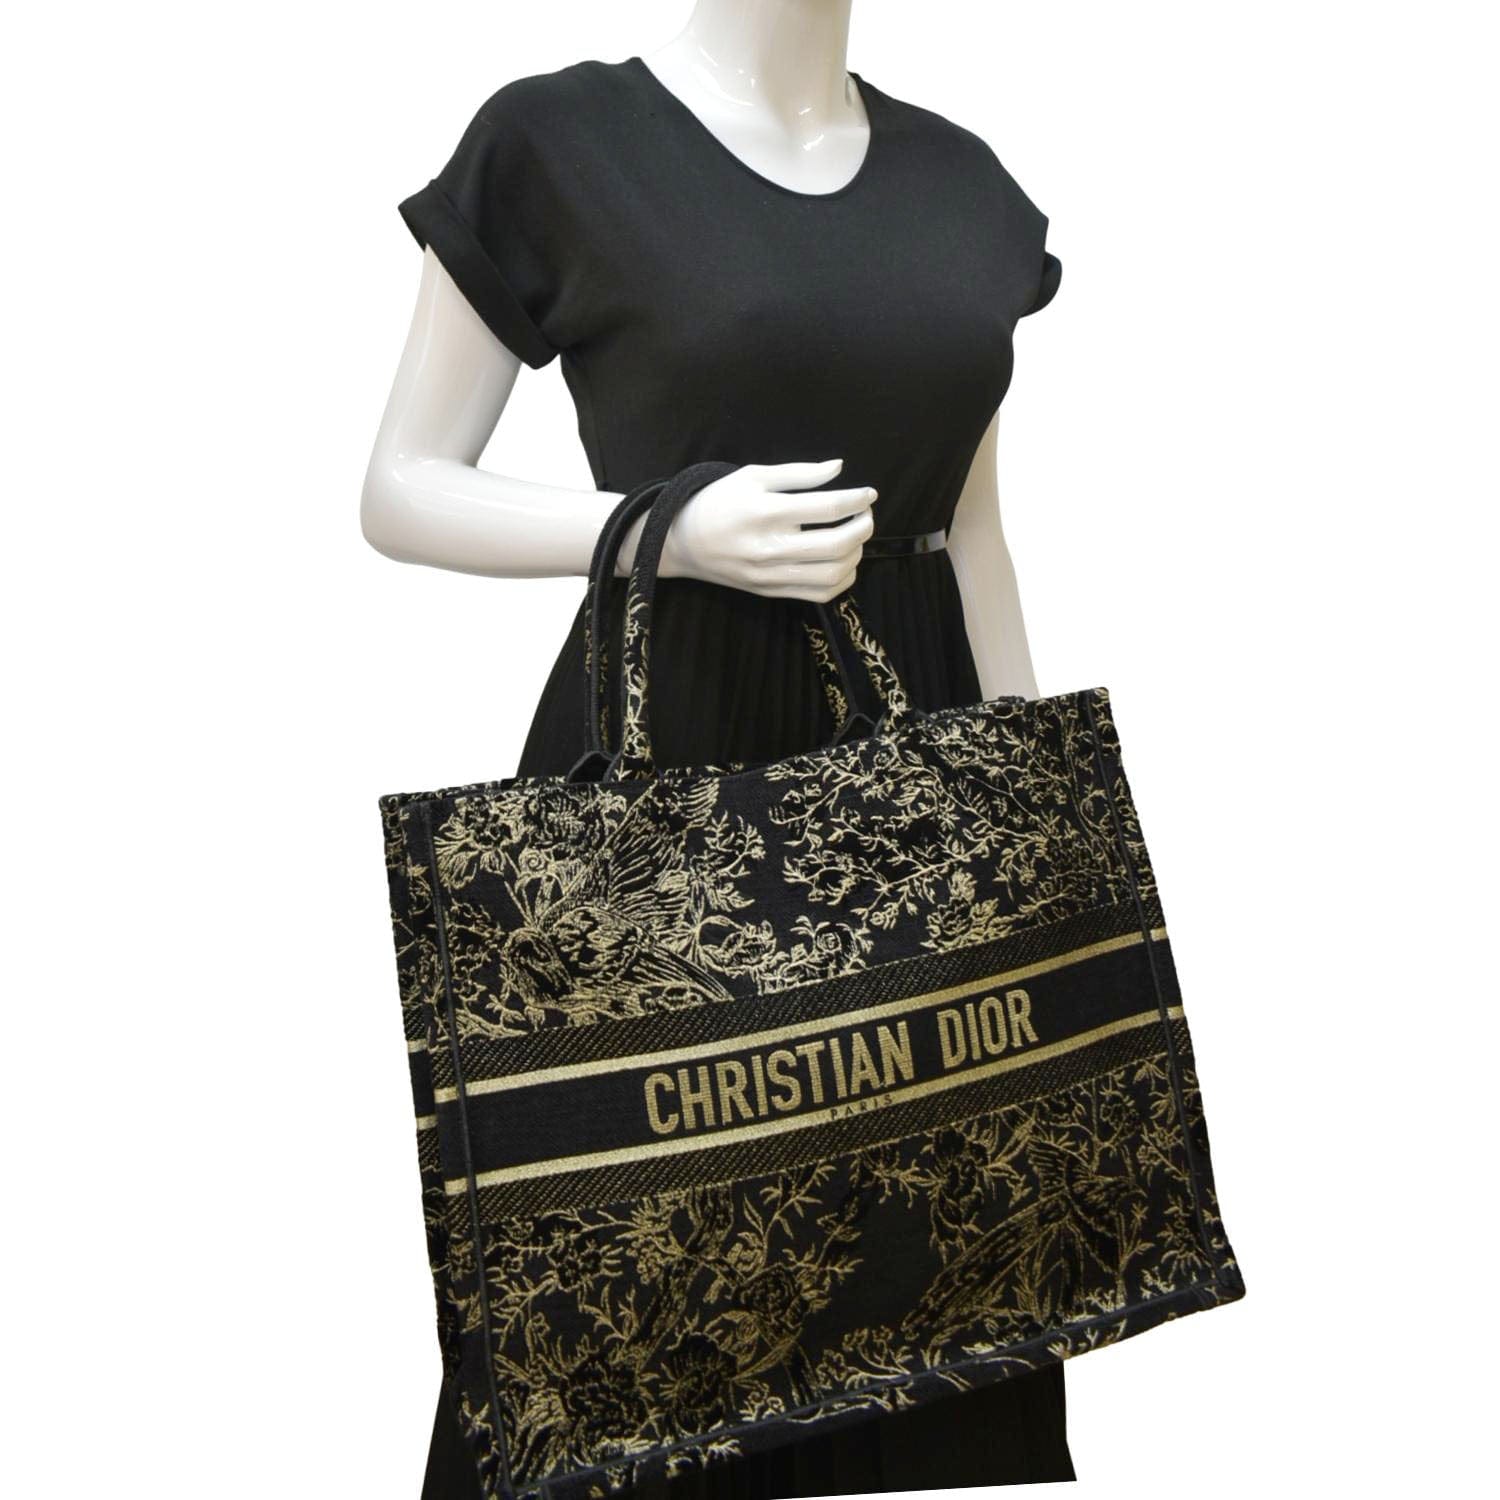 CHRISTIAN DIOR BOOK TOTE LIMITED EDITION, EMBROIDERED COTTON Bag